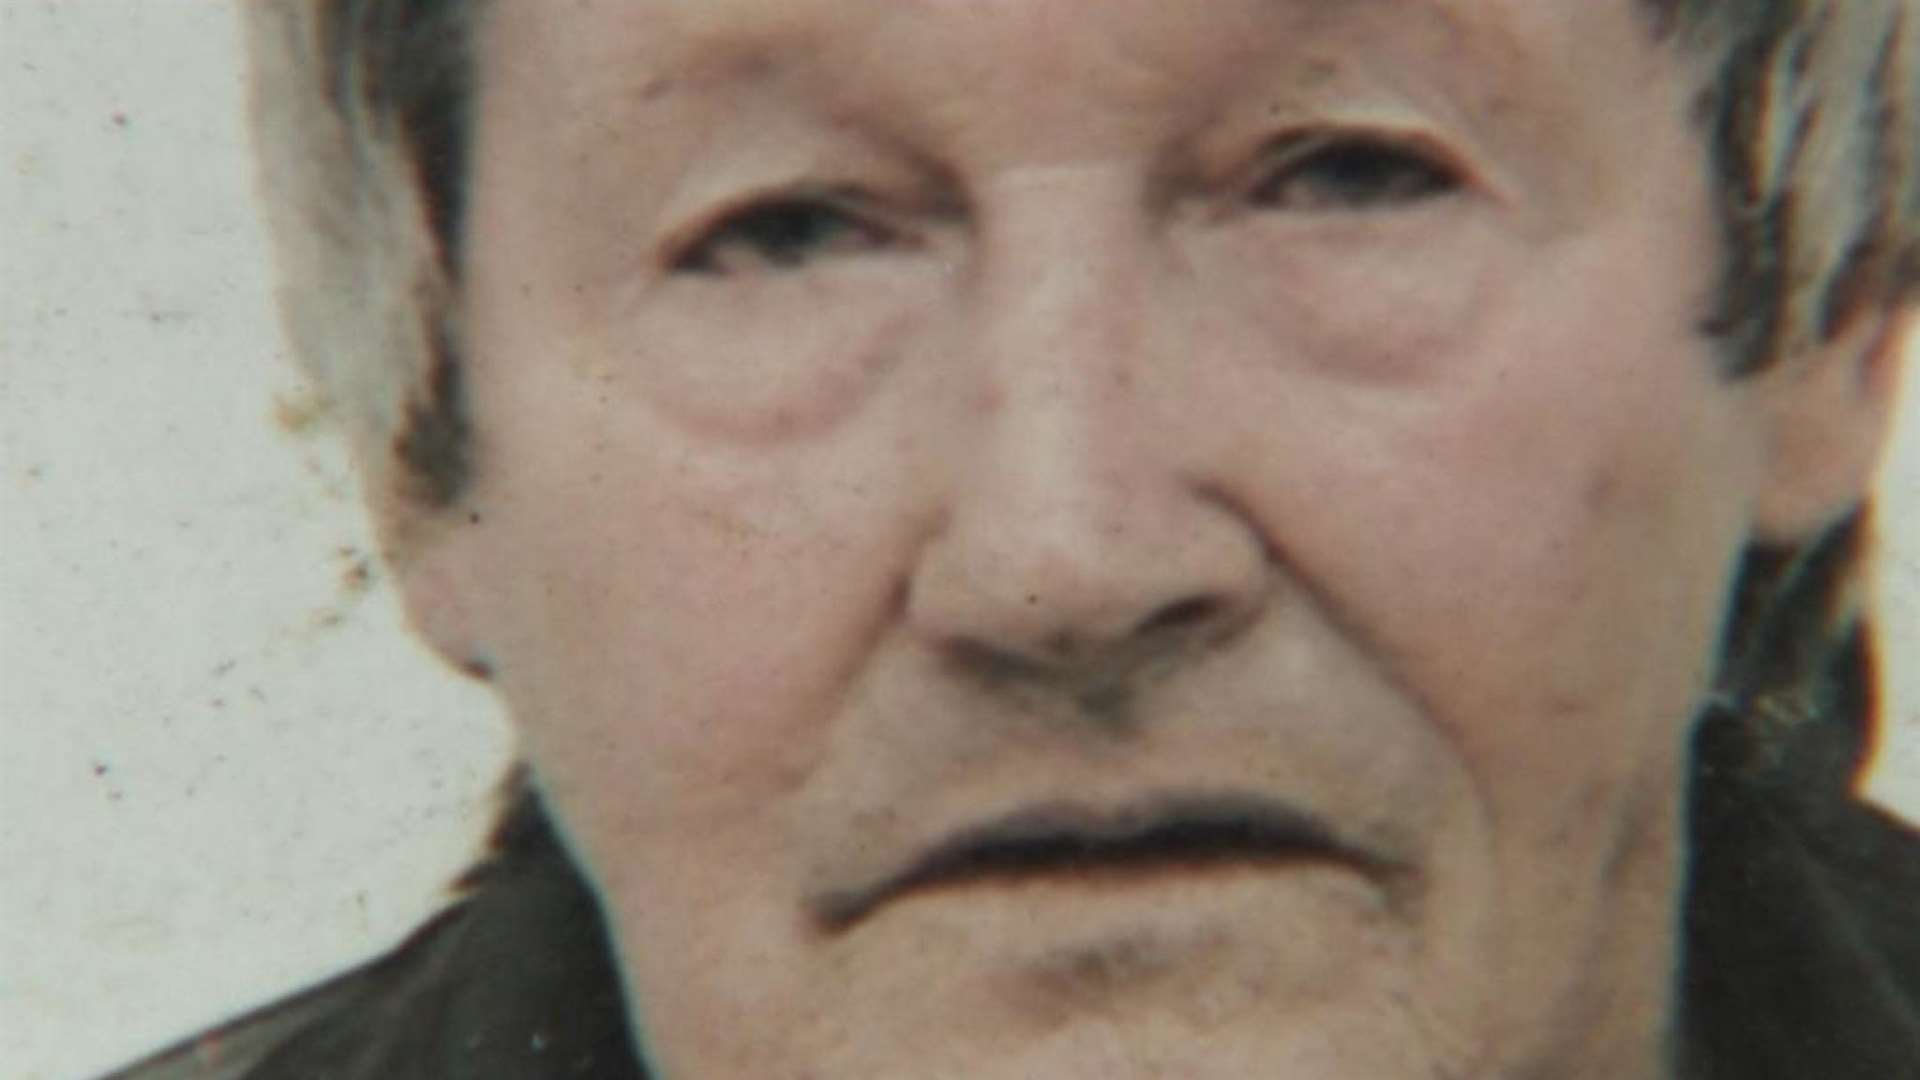 Anthony Payne was found dead at his home, having suffered head injuries